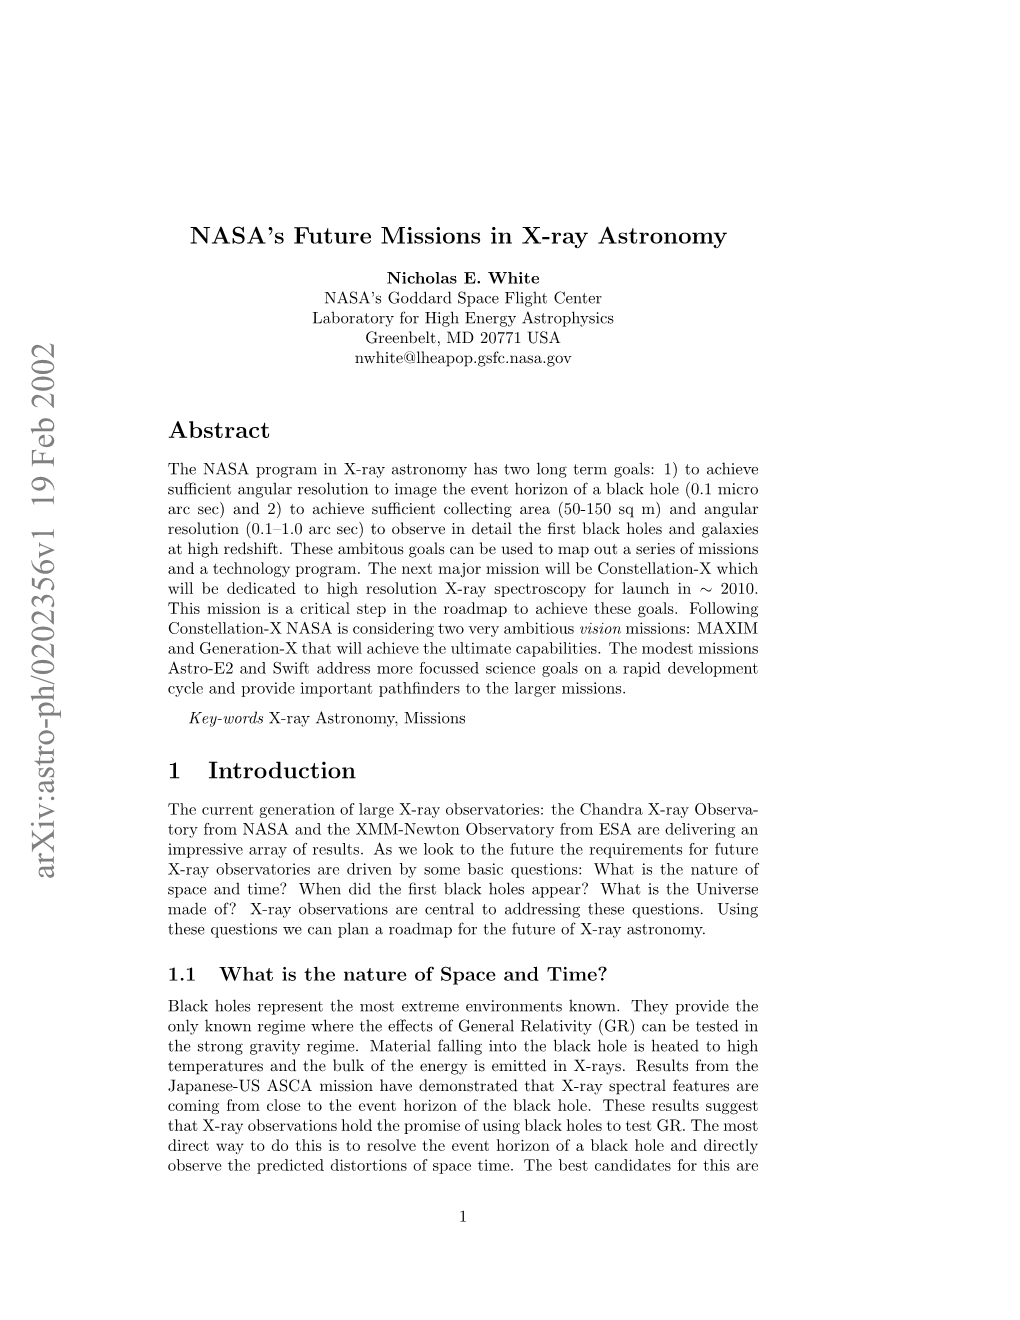 NASA's Future Missions in X-Ray Astronomy